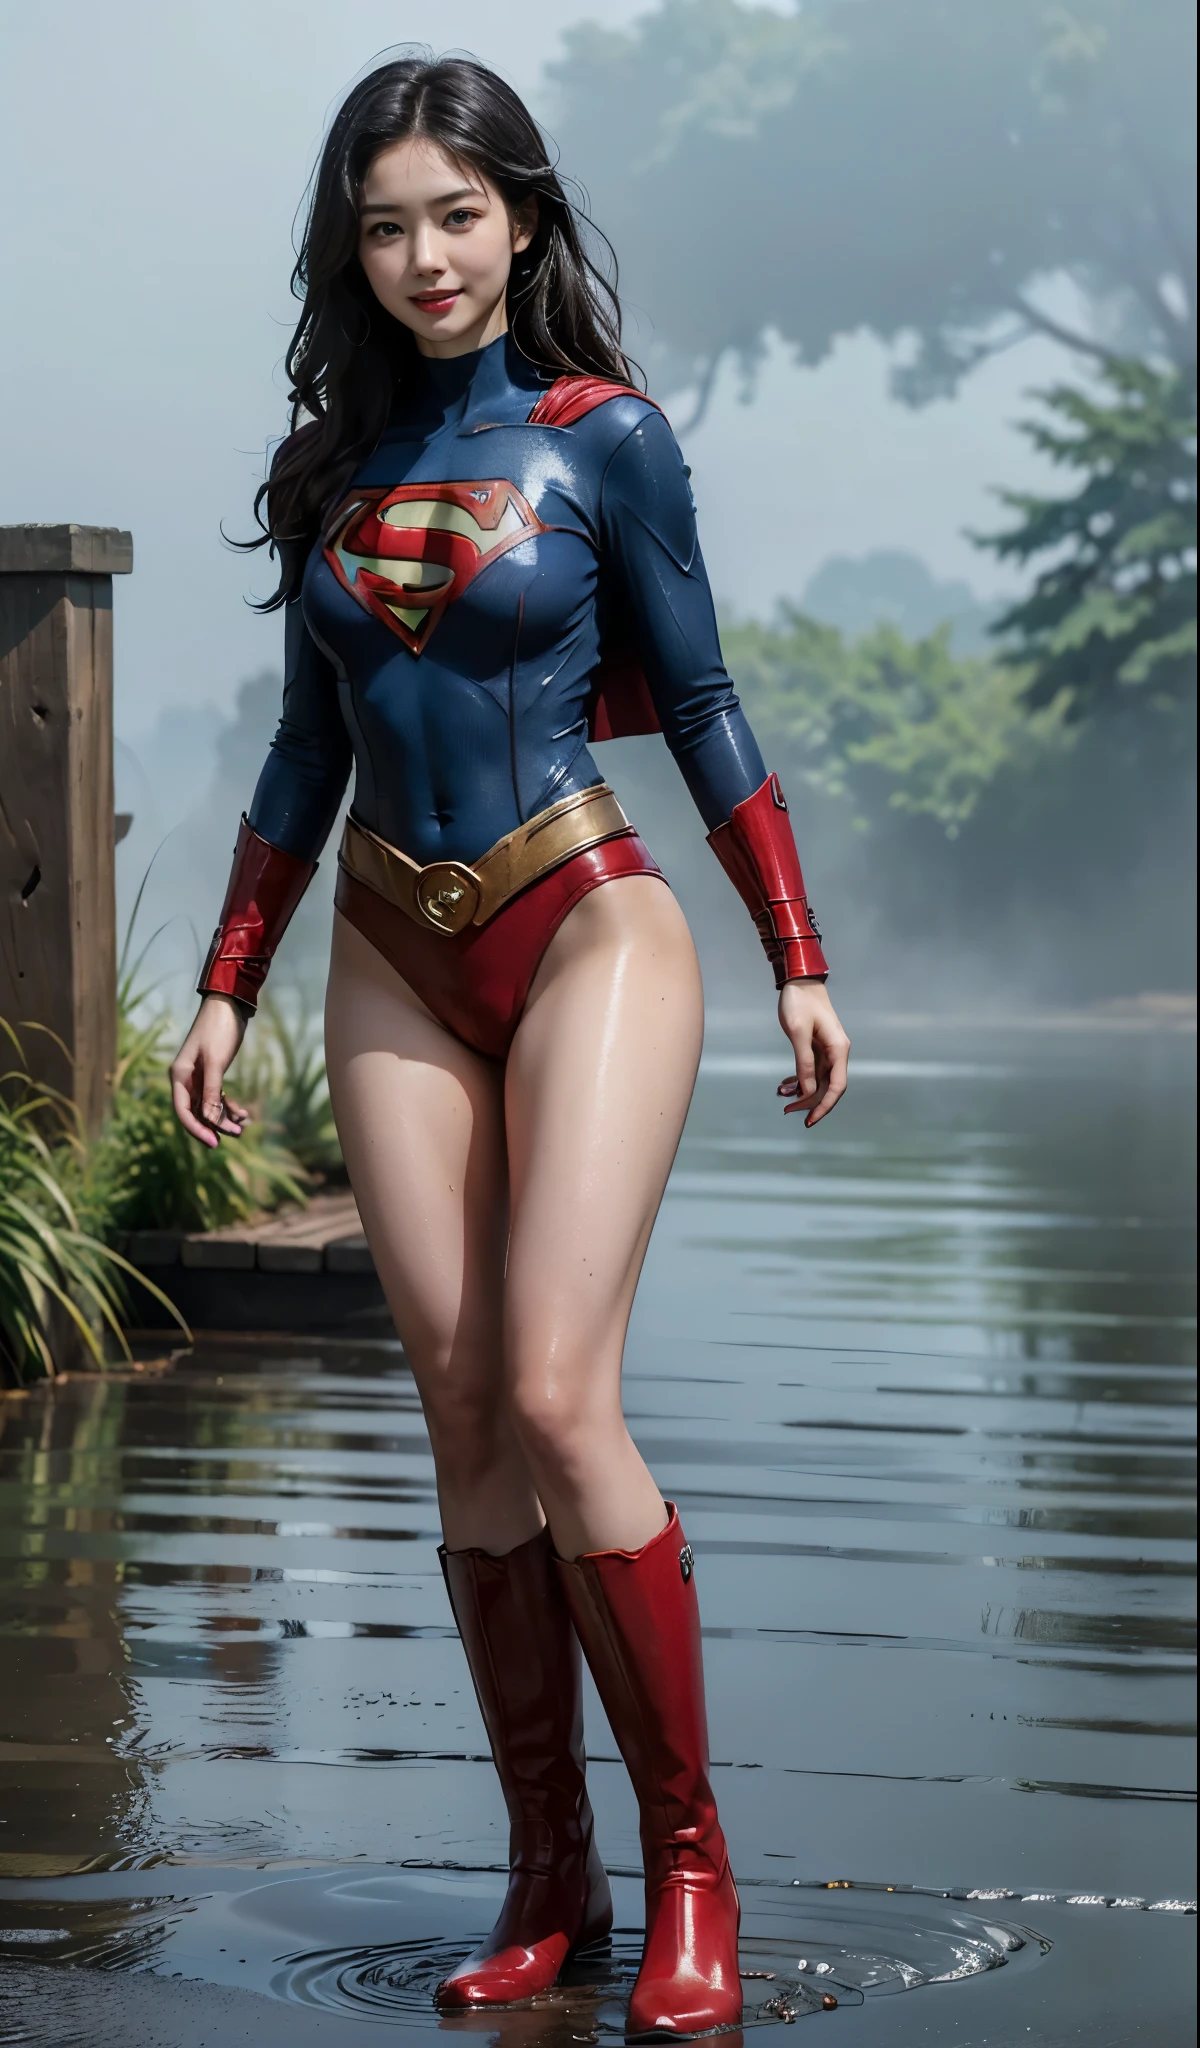 (((Wear black tights on your beautiful legs.)))、(((Grow legs、tall、Legally express the beauty of your smile)))、((((Make the most of the original image)))、(((Supergirl Costume)))、(((beautiful hairl)))、(((Suffering)))、(((Feet must necessarily be worn with black tights)))、(((You need to wear red boots)))、((Top image quality、8K))、((top-quality、8K、​masterpiece:1.3))、(((Keep Background )))、Crisp focus:1.2、Beautiful woman with perfect body shape:1.4、Slender Abs:1.2、a wet body:1.5、Highly detailed facial and skin texture、8K